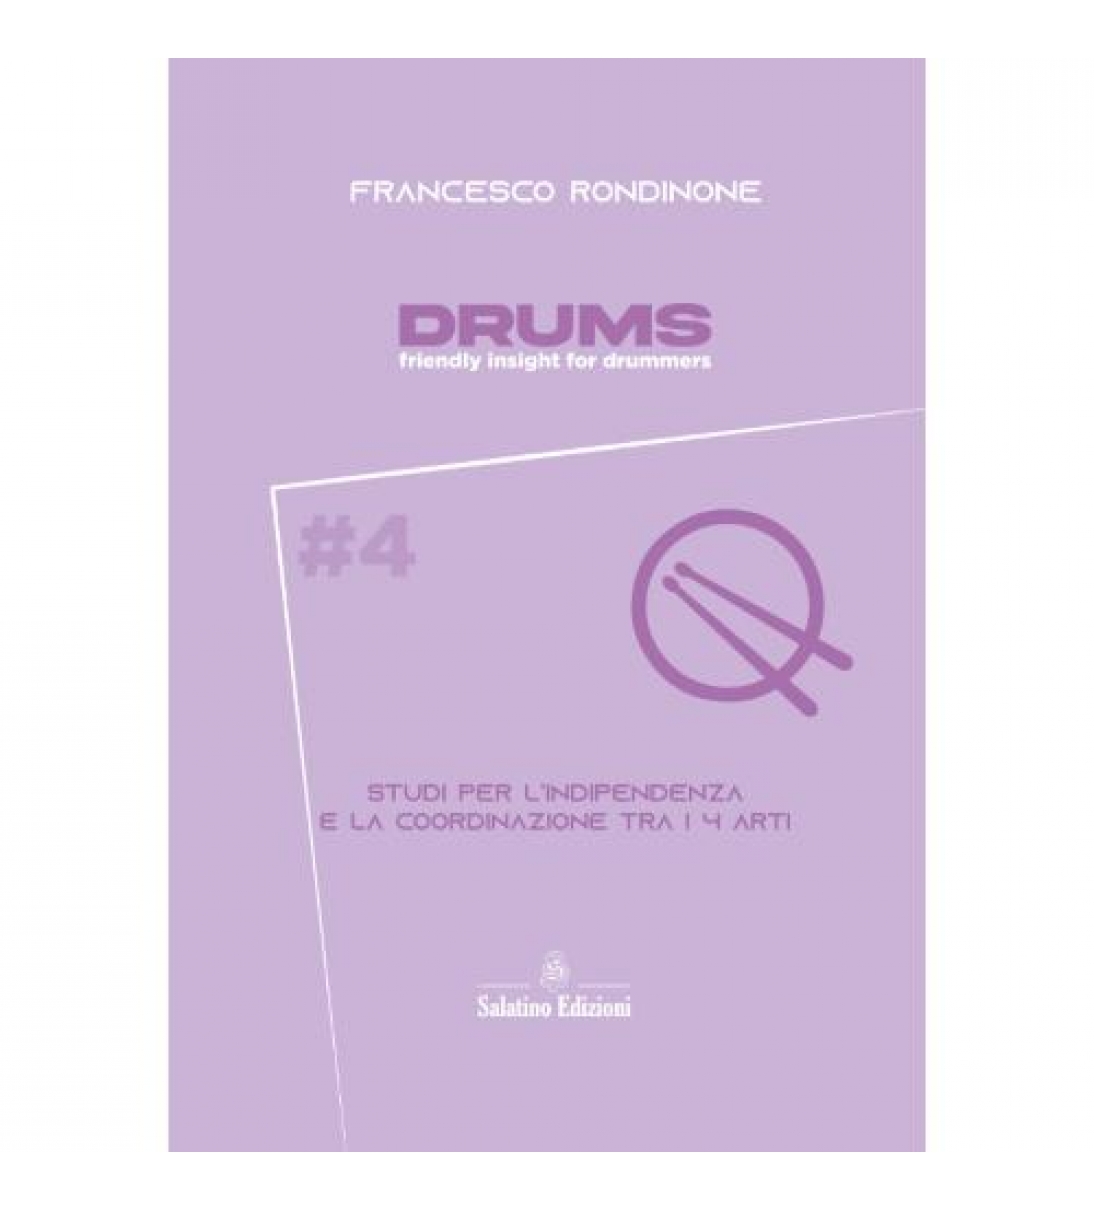 DRUMS: "friendly insights for drummers" volume 4